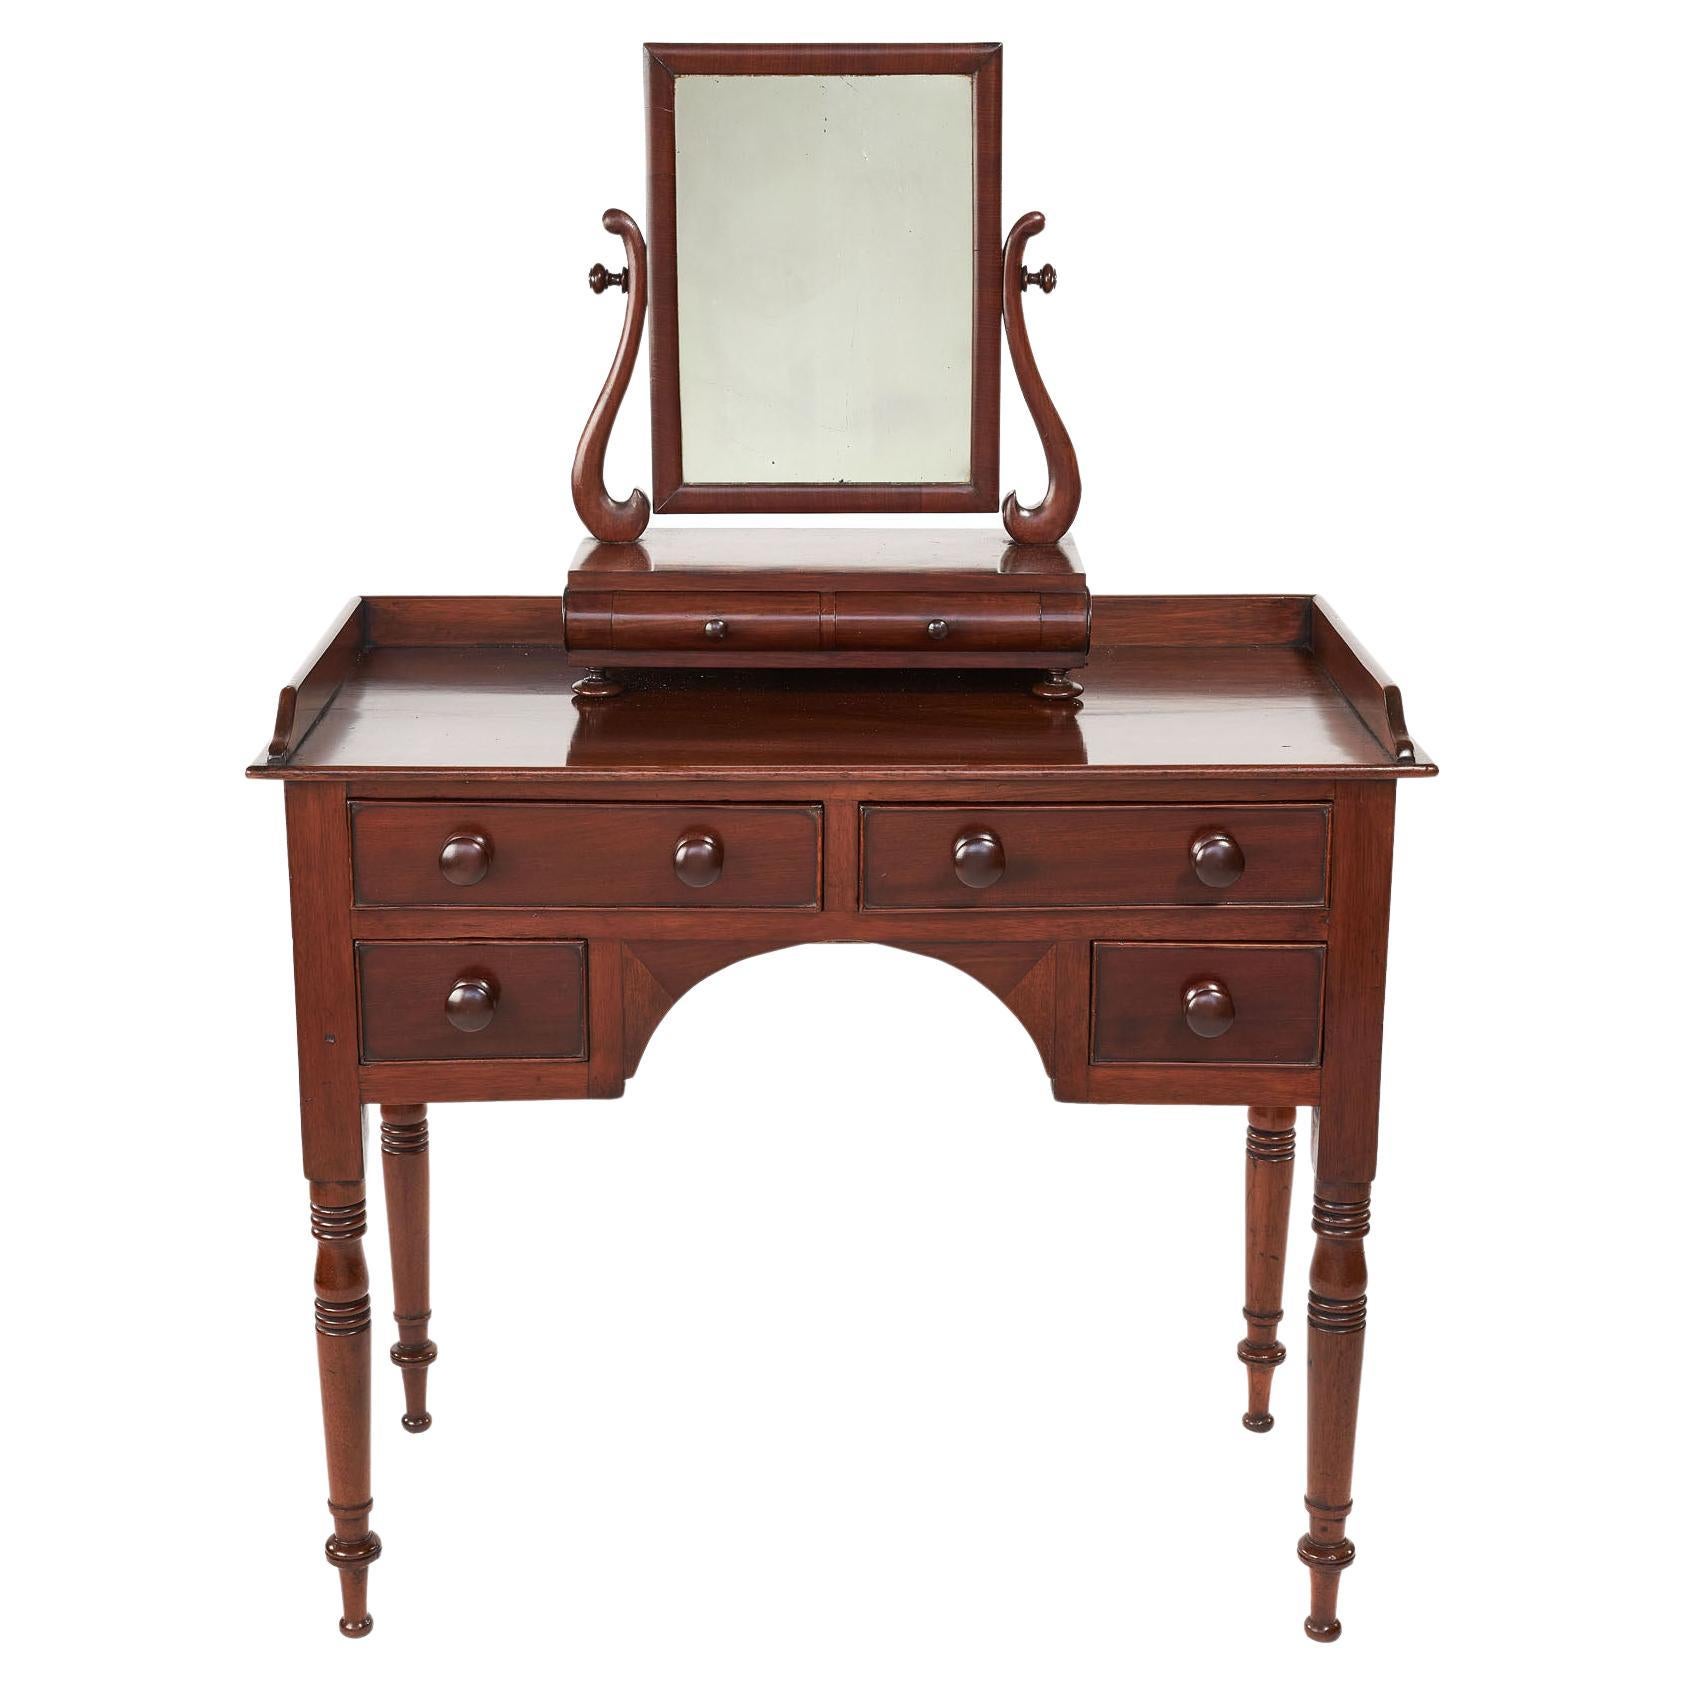 Small Antique William IV Mahogany Vanity/ Dressing Table with Swing Mirror